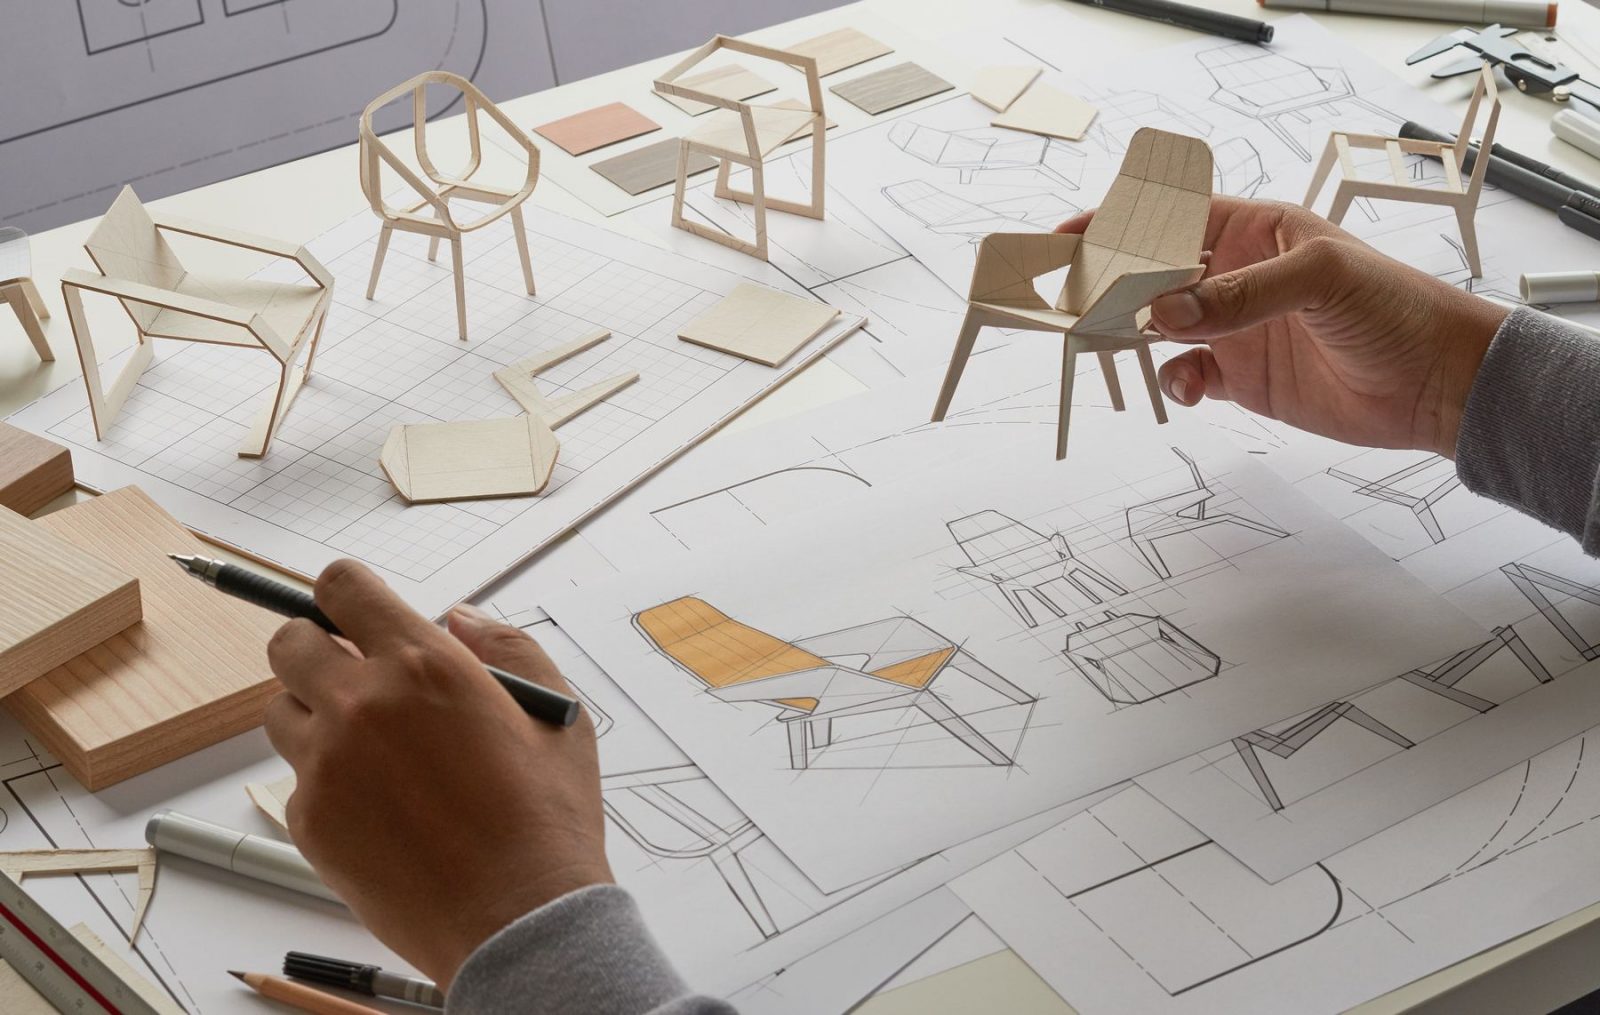 Furniture designer hands holding a pencil and a miniature chair 3d model with chair design sketches in background